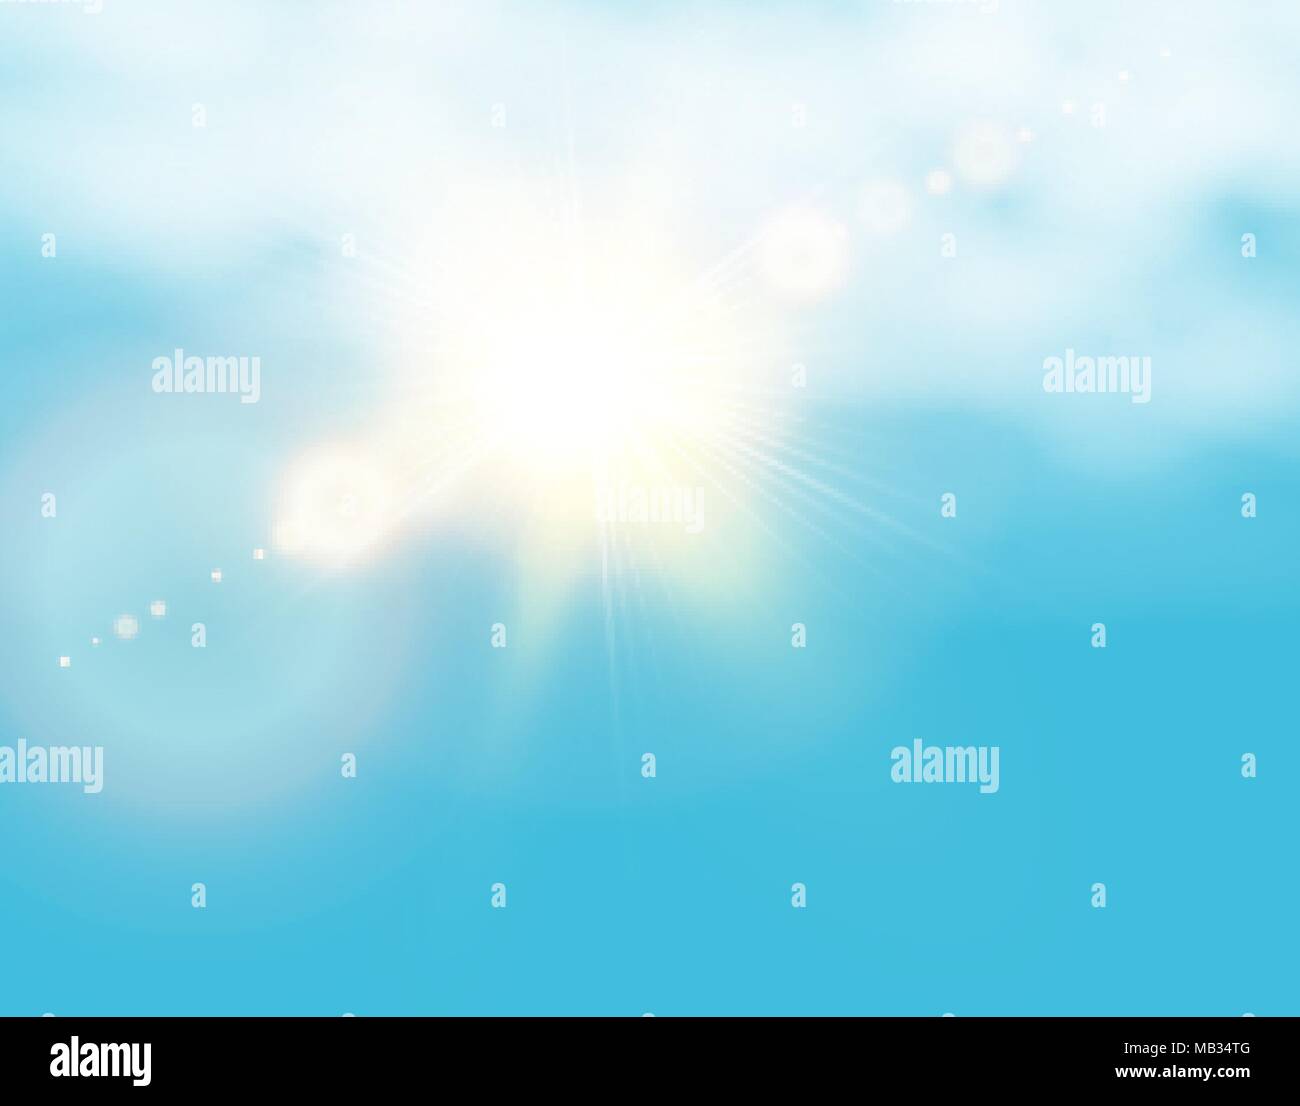 Realistic shining sun with lens flare. Blue sky with clouds background. Vector illustration Stock Vector